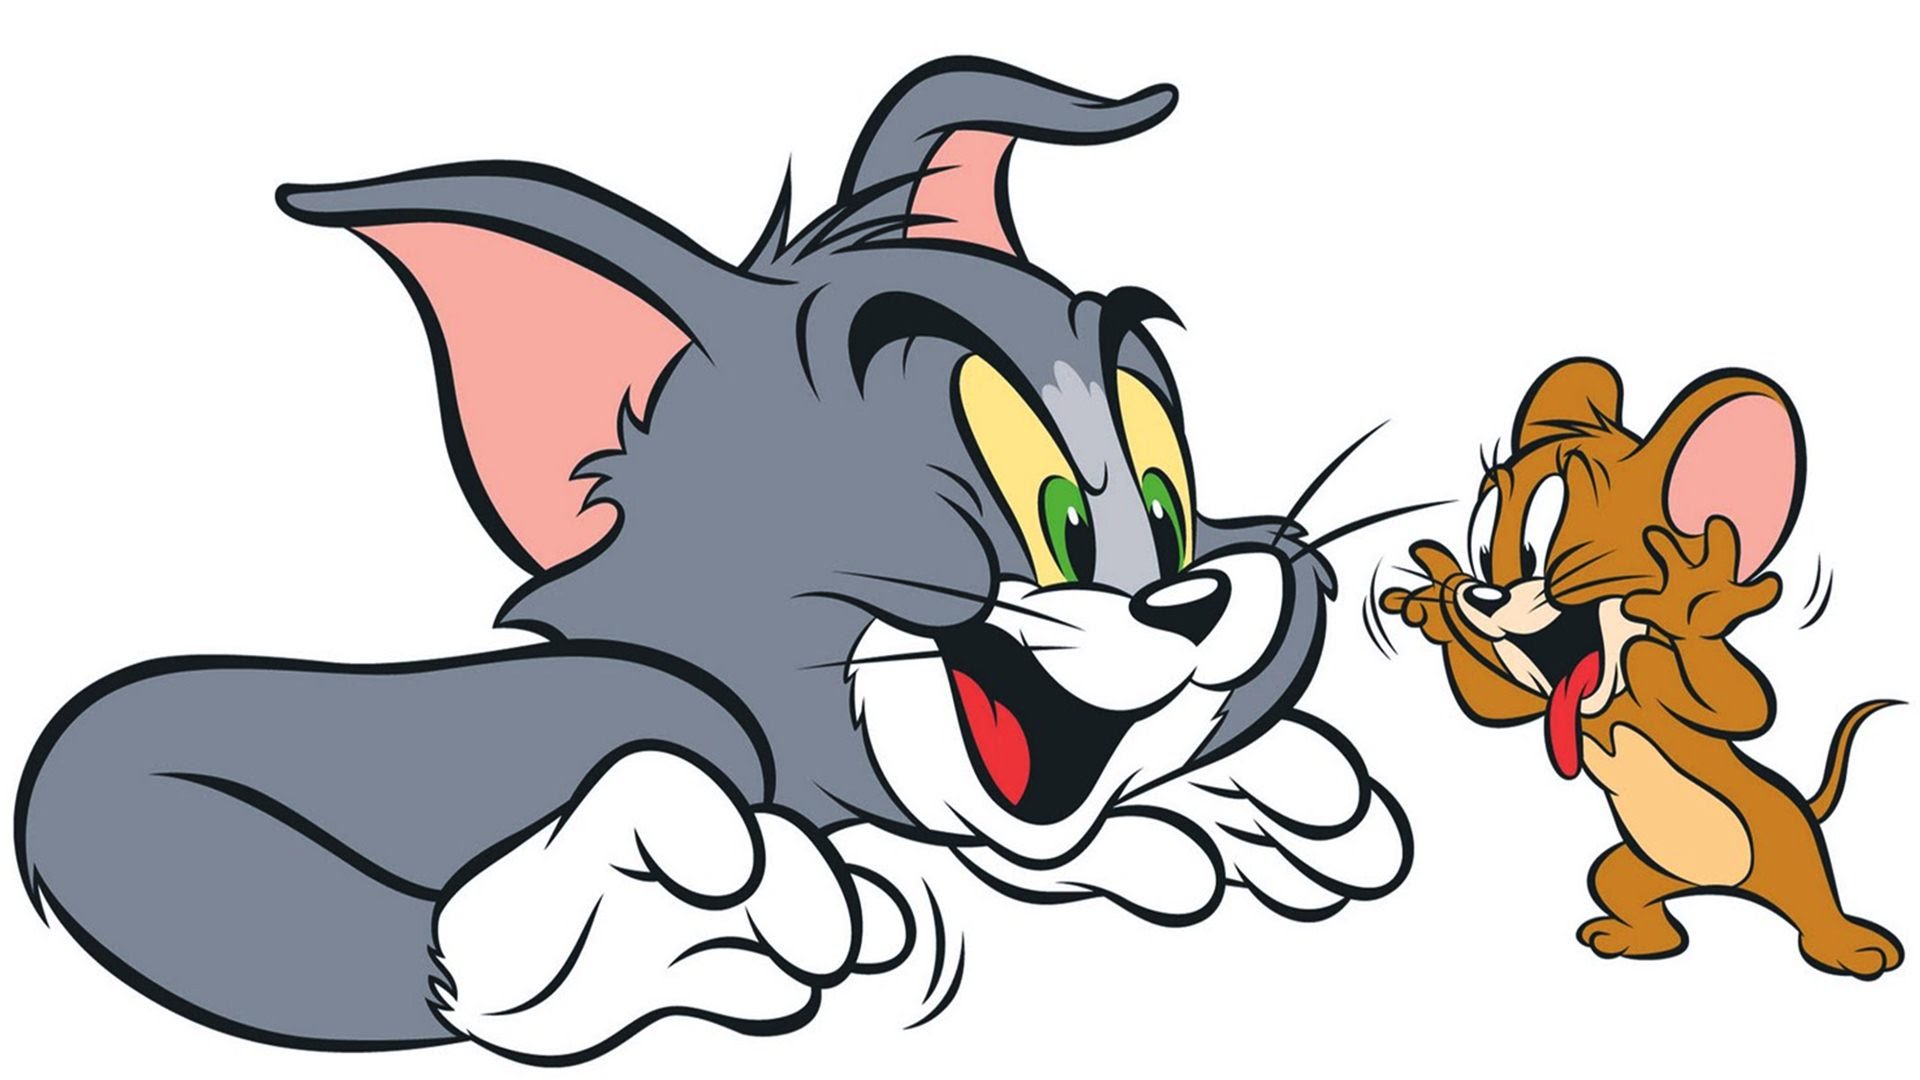 Tom And Jerry  HD wallpapers, Desktop wallpaper - most viewed